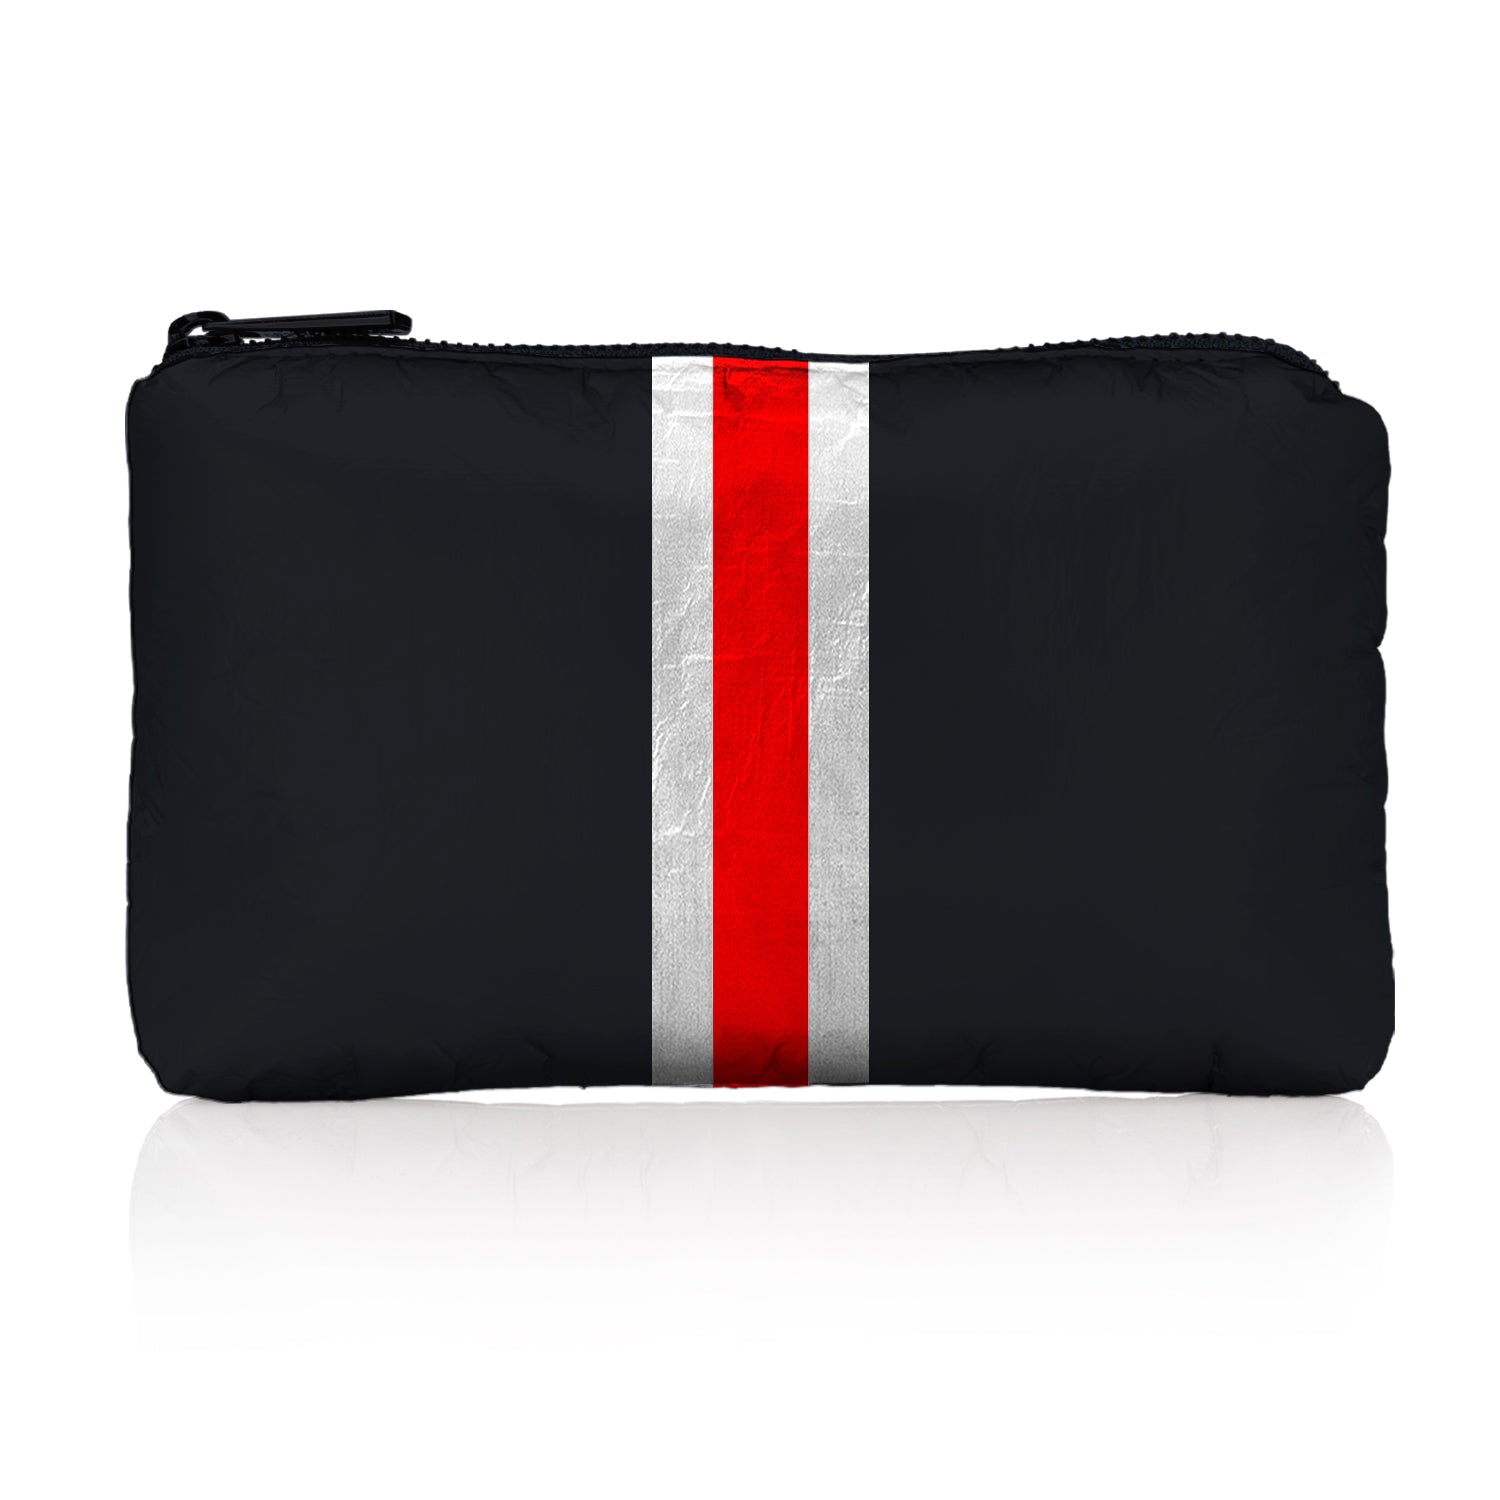 Mini Zipper Pack in Black with Red & White Stripes